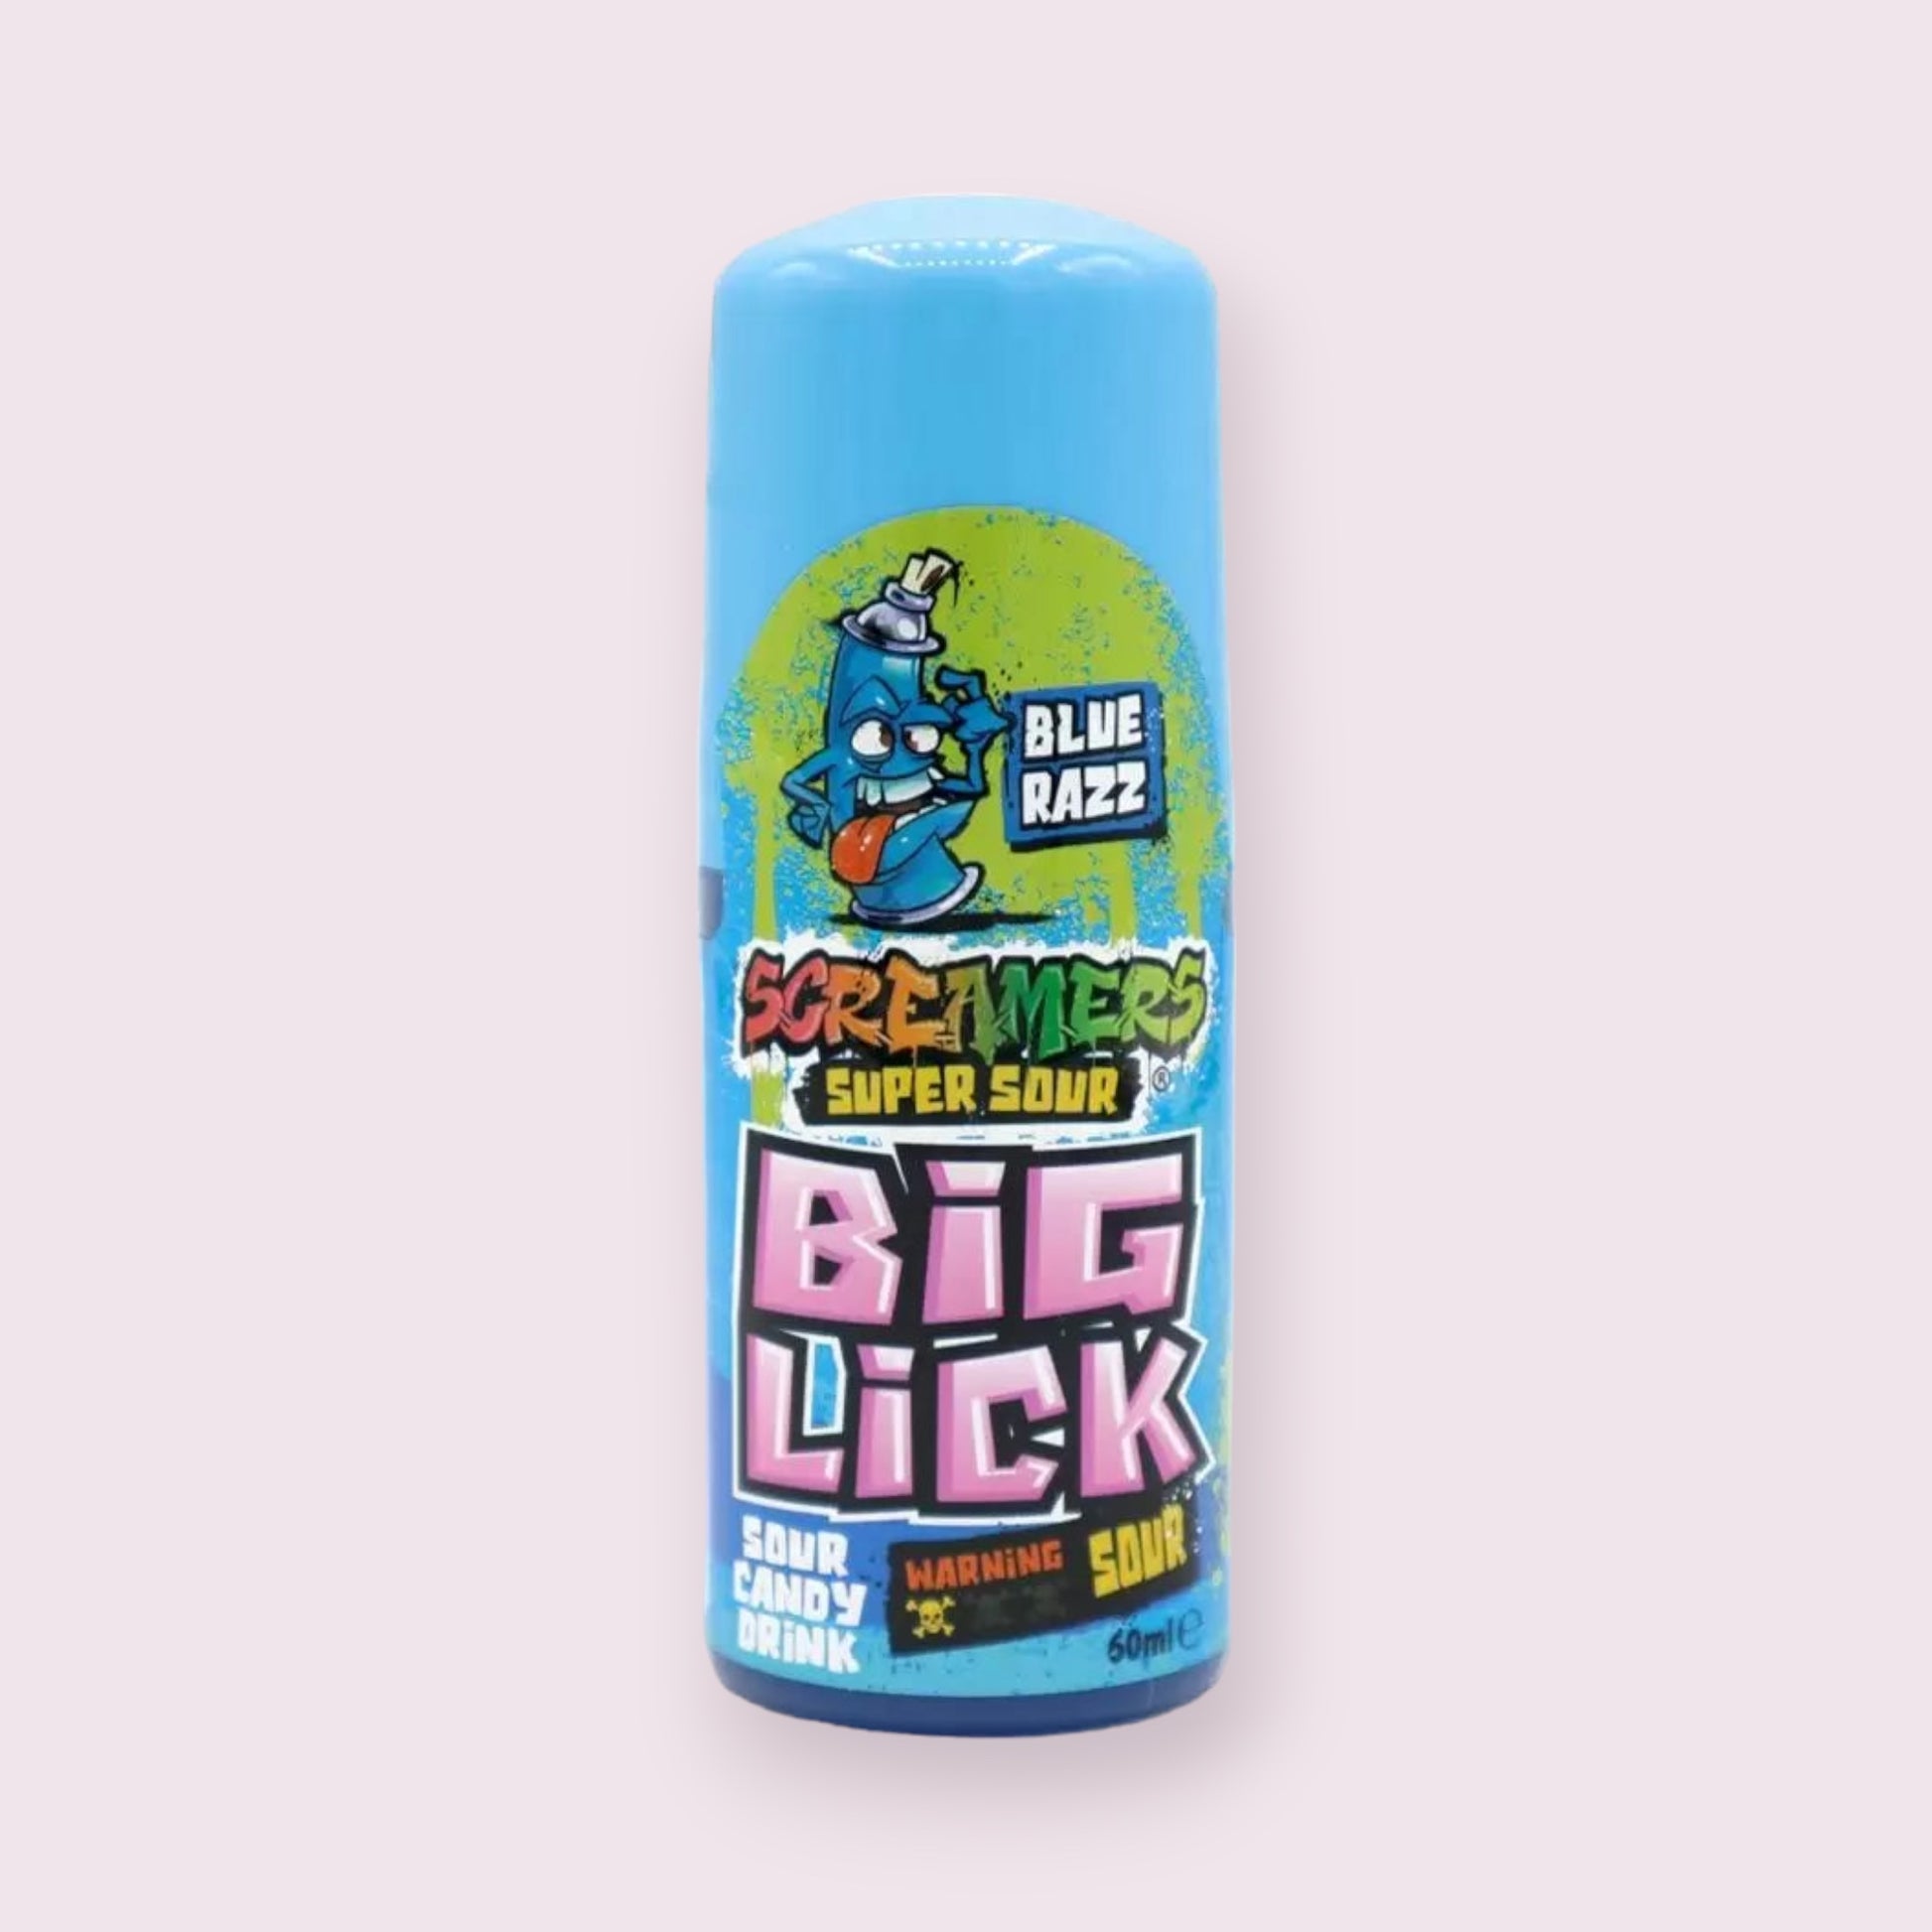 Screamers Big Lick Candy Roll  Pixie Candy Shoppe Blue razz  